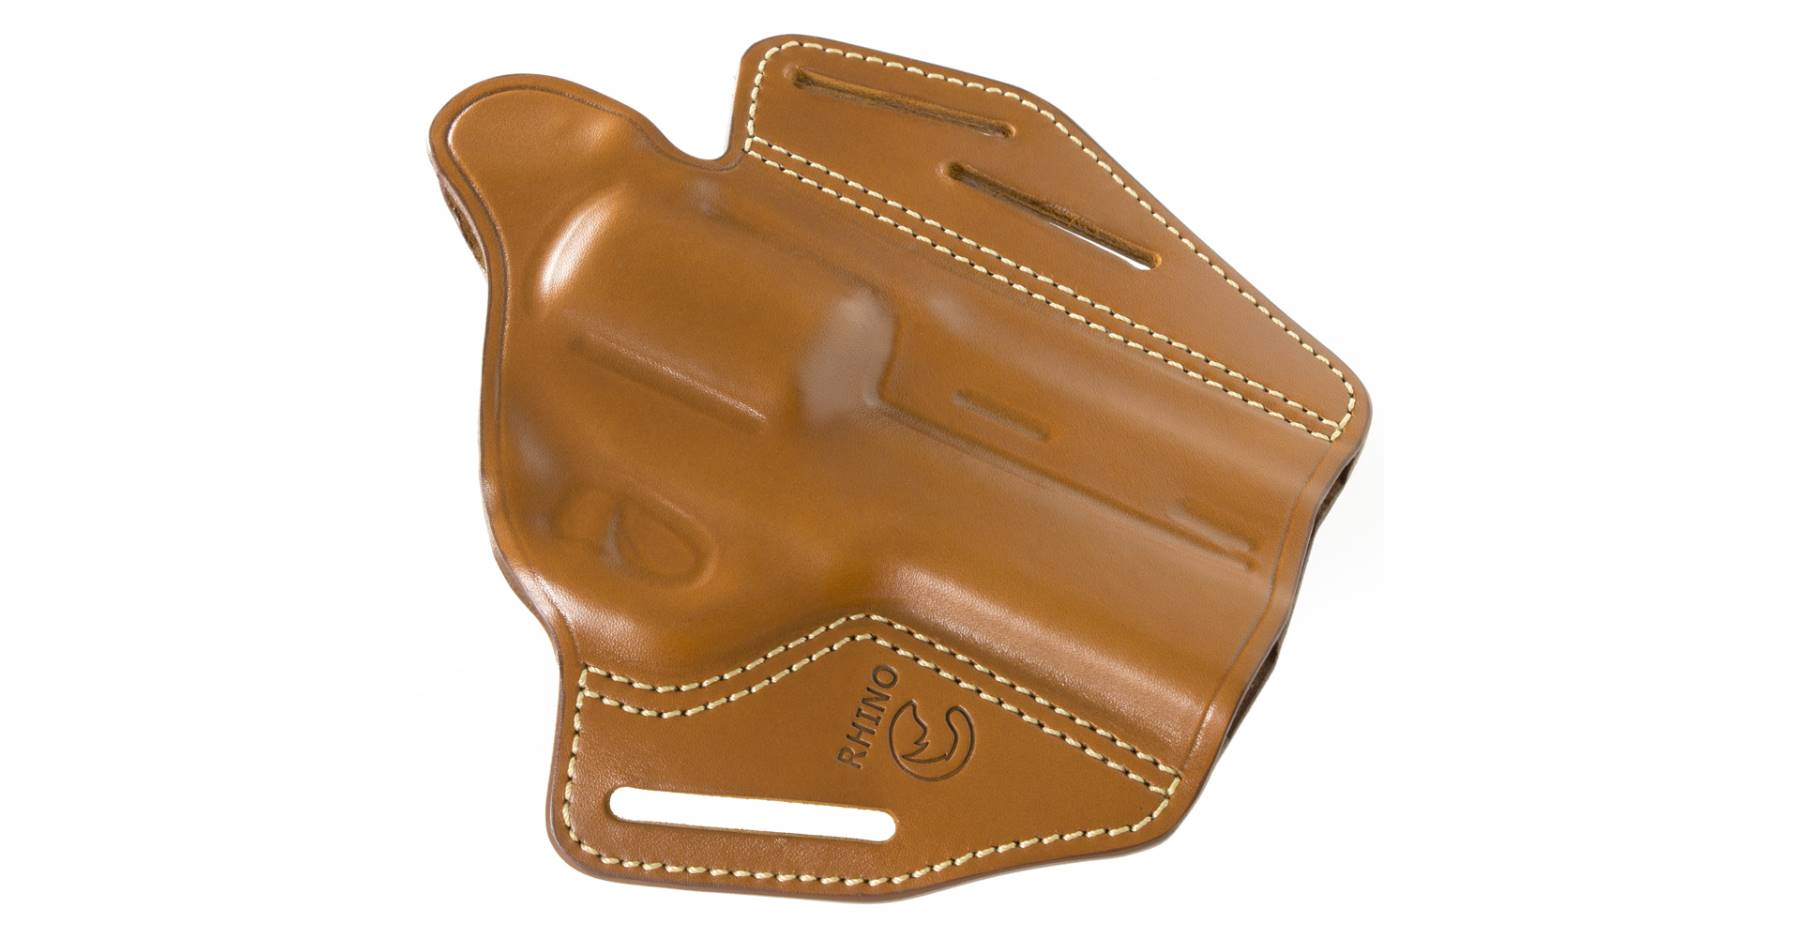 Rhino Revolver 4" Brown Leather Holster